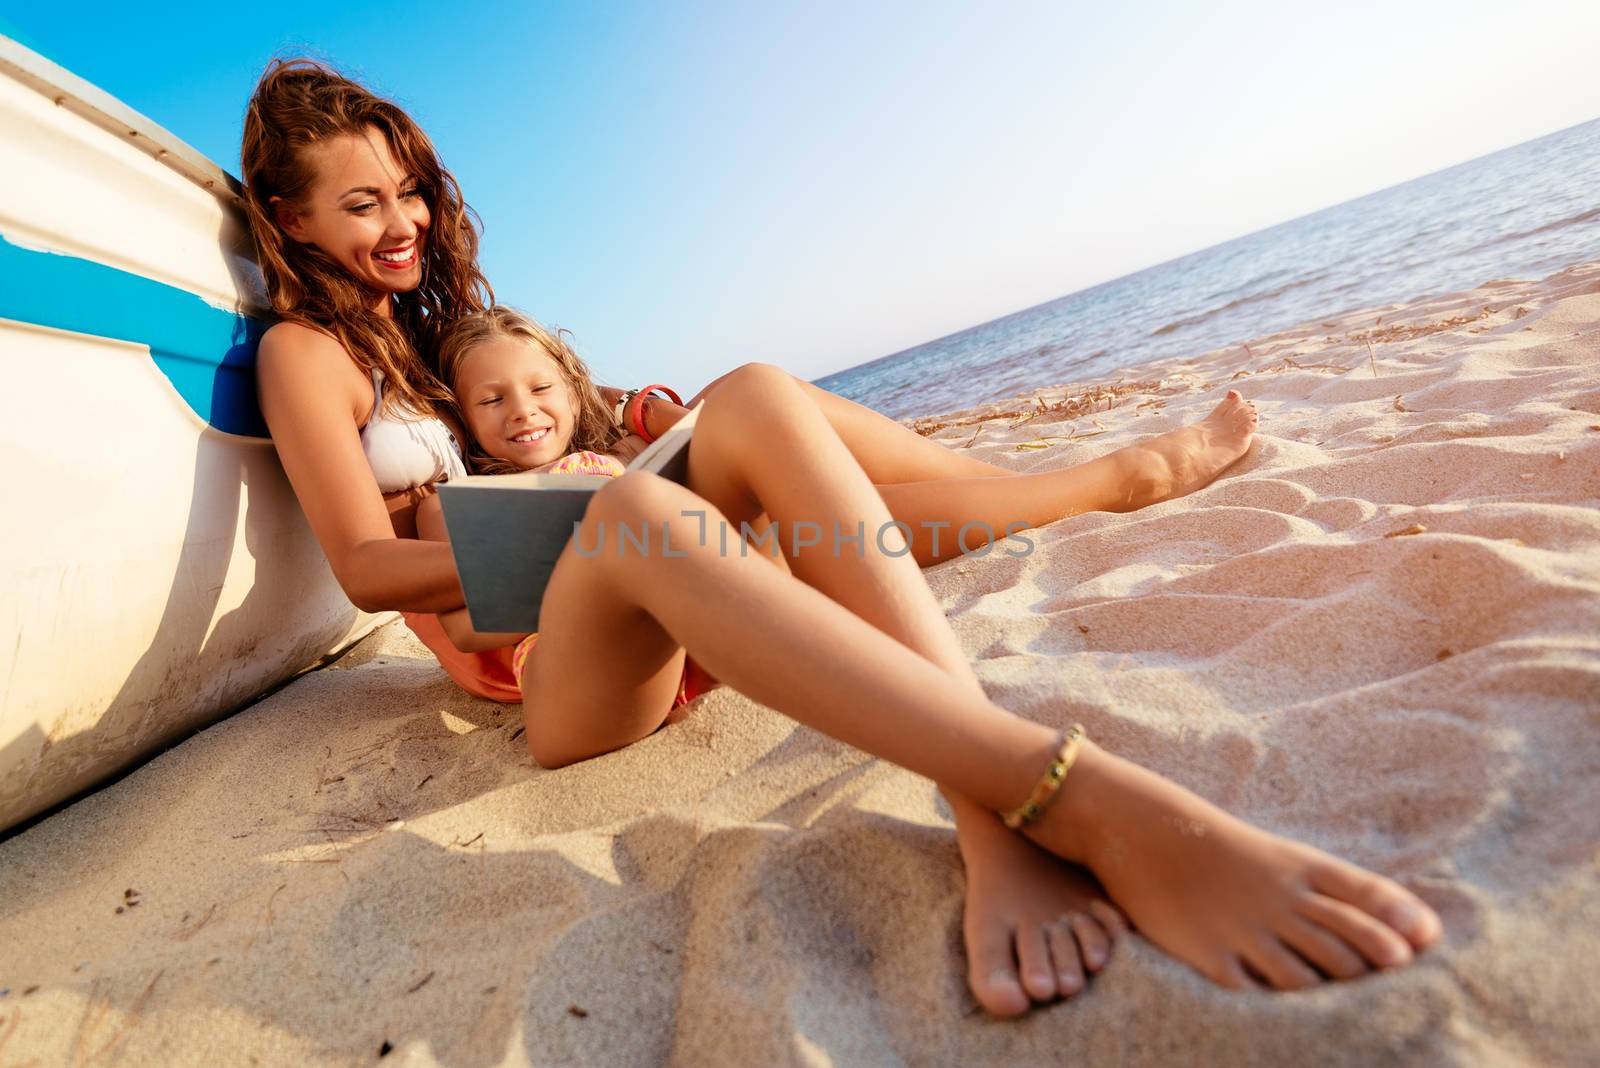 Beautiful little girl and young woman reading a book on the sandy beach. She is sitting next to boat with smile on her face.